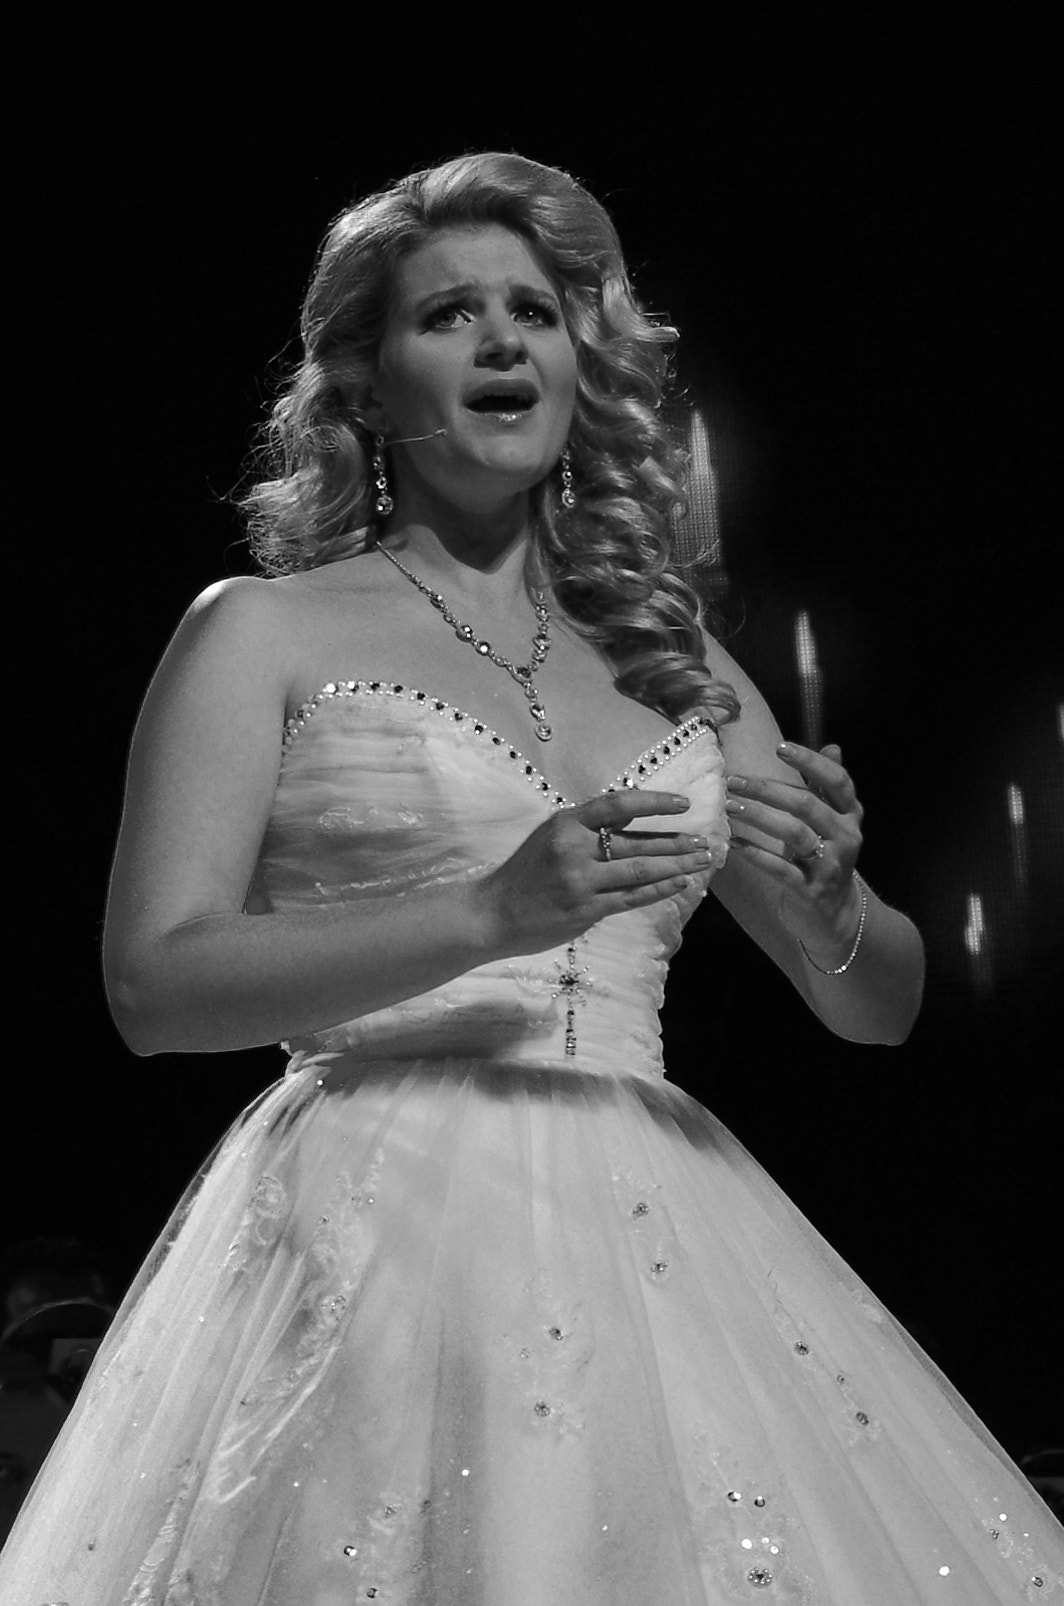 Mirusia performing with Andre Rieu